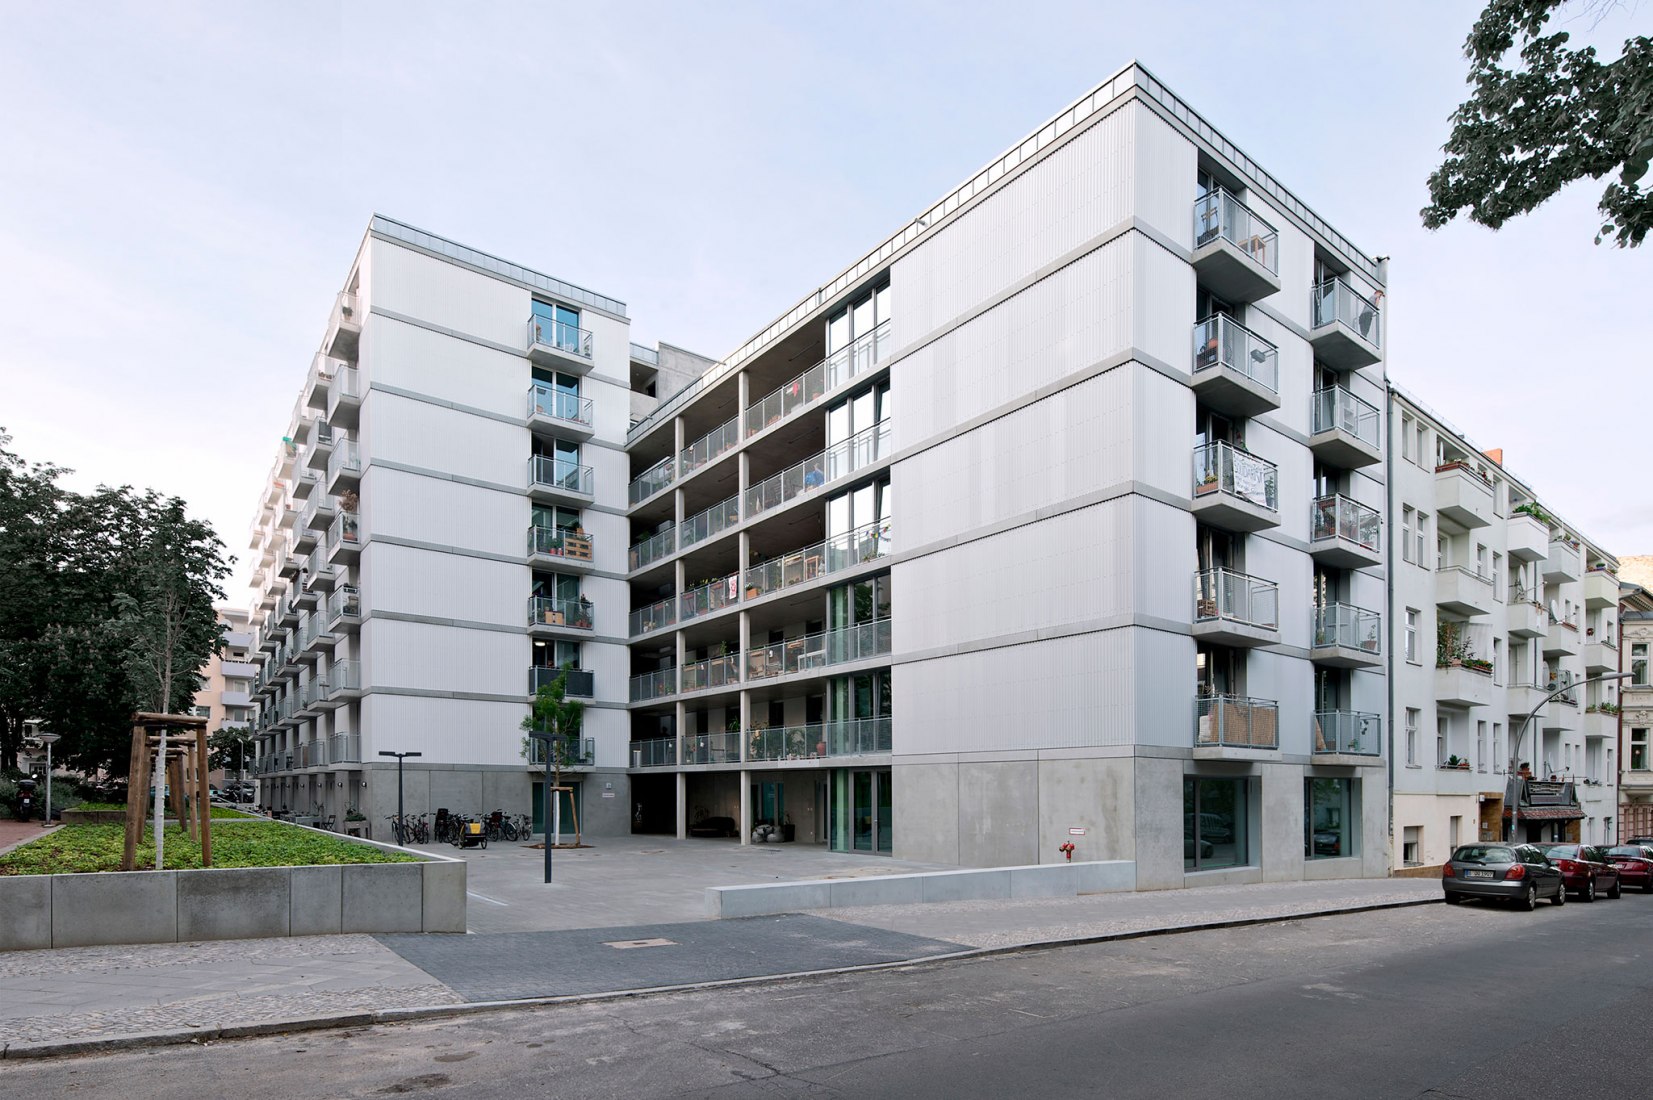 New Housing on Briesestraße by EM2N. Photograph by Andrew Alberts